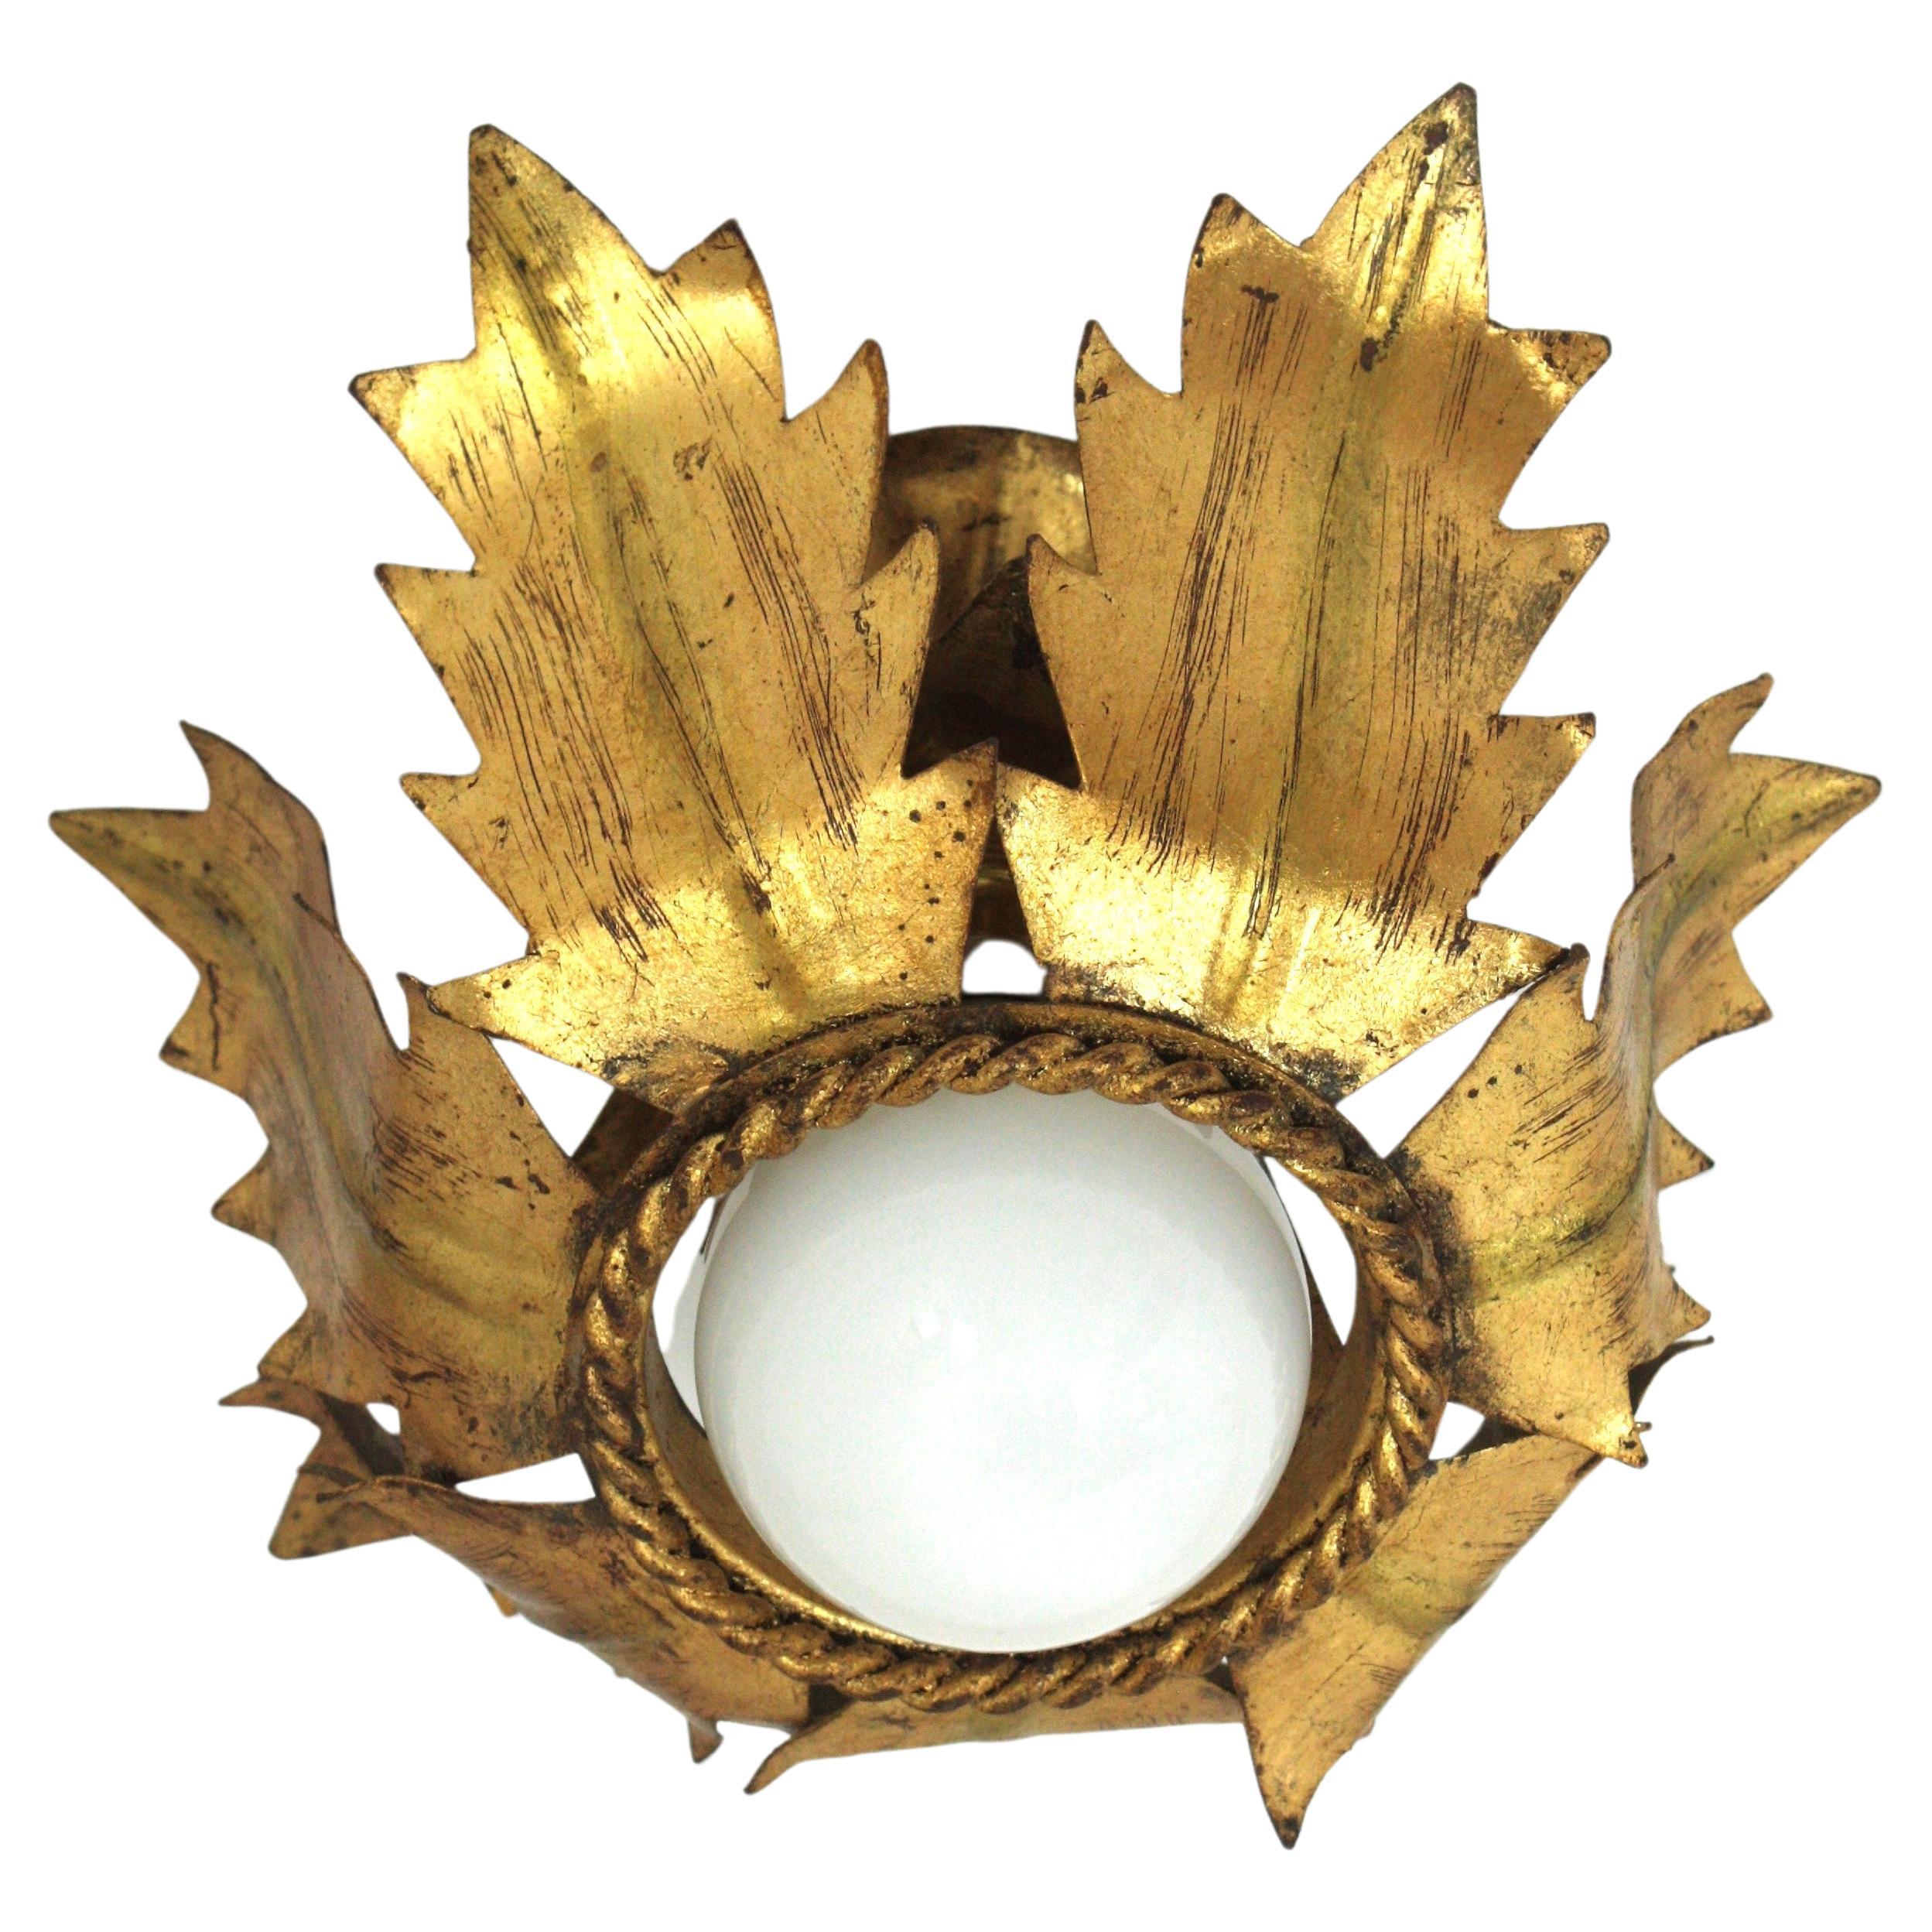 Eye-catching single flower bud/ tole flush mount light fixture in gold leaf gilt iron. France, 1940s.
This handwrought iron ceiling light fixture has a terrific aged patina showing its original gold leaf gilding.
It can be used as a flush mount, as